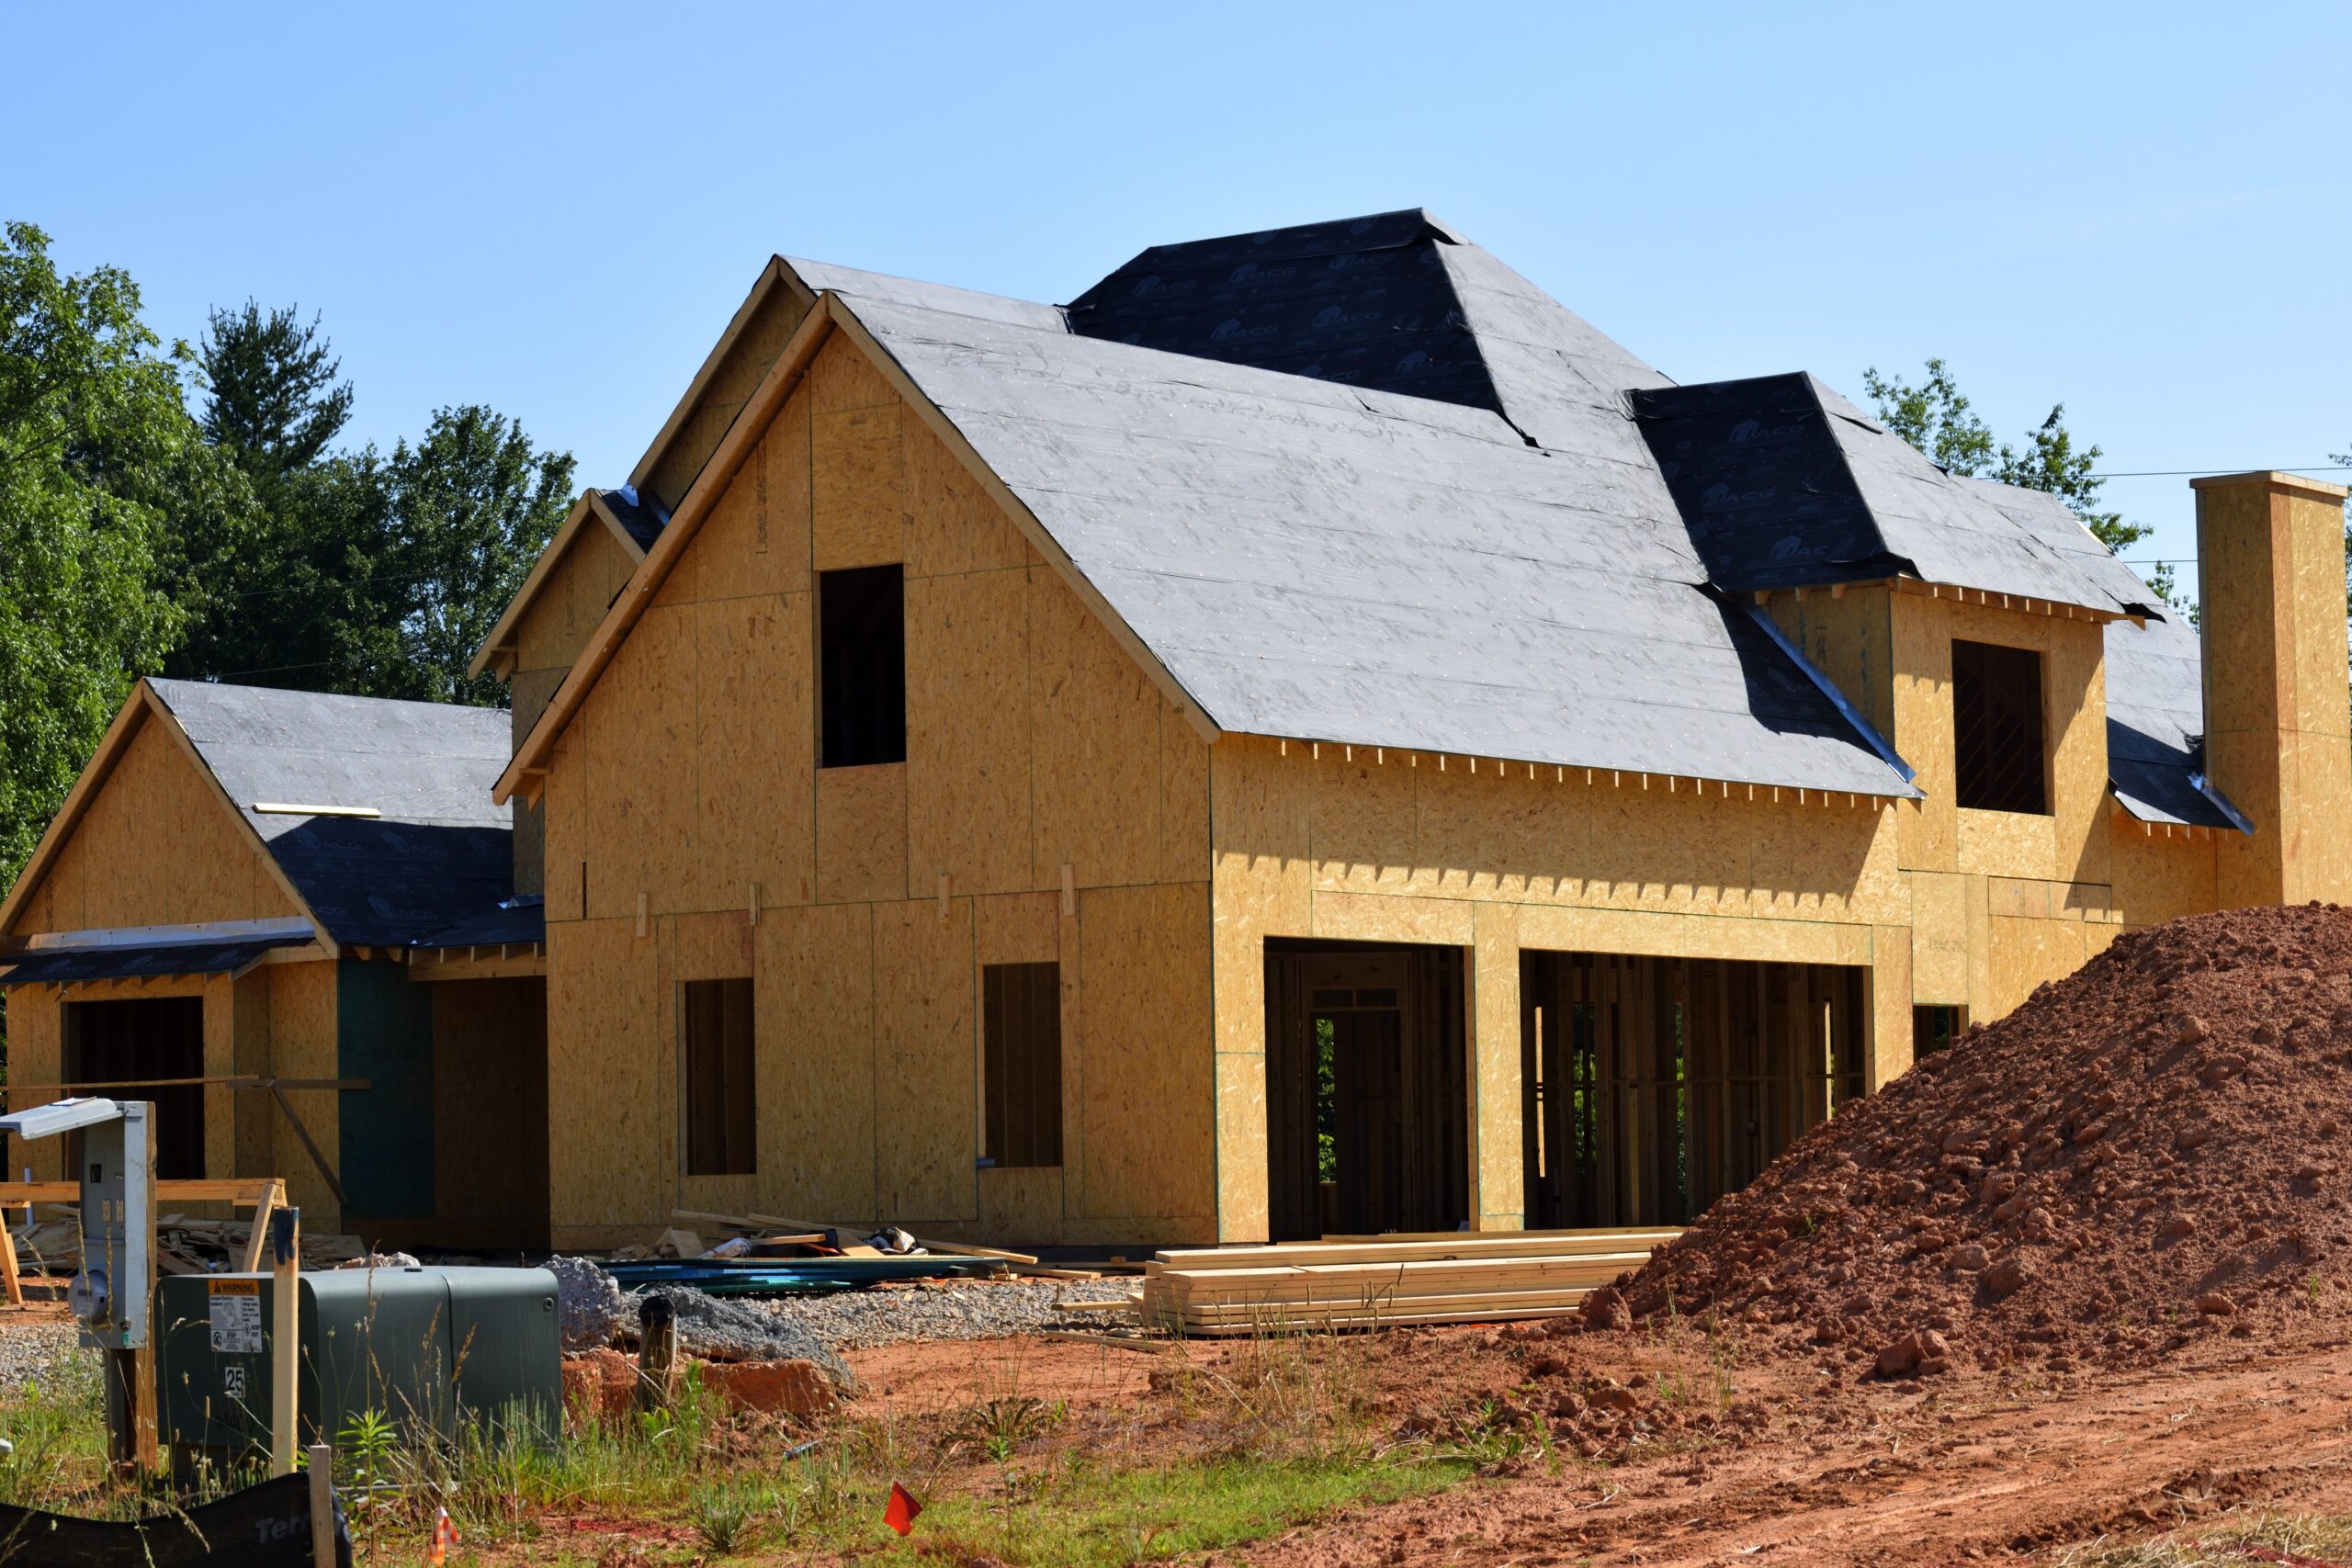 Roofing Contractor in Charlotte, NC